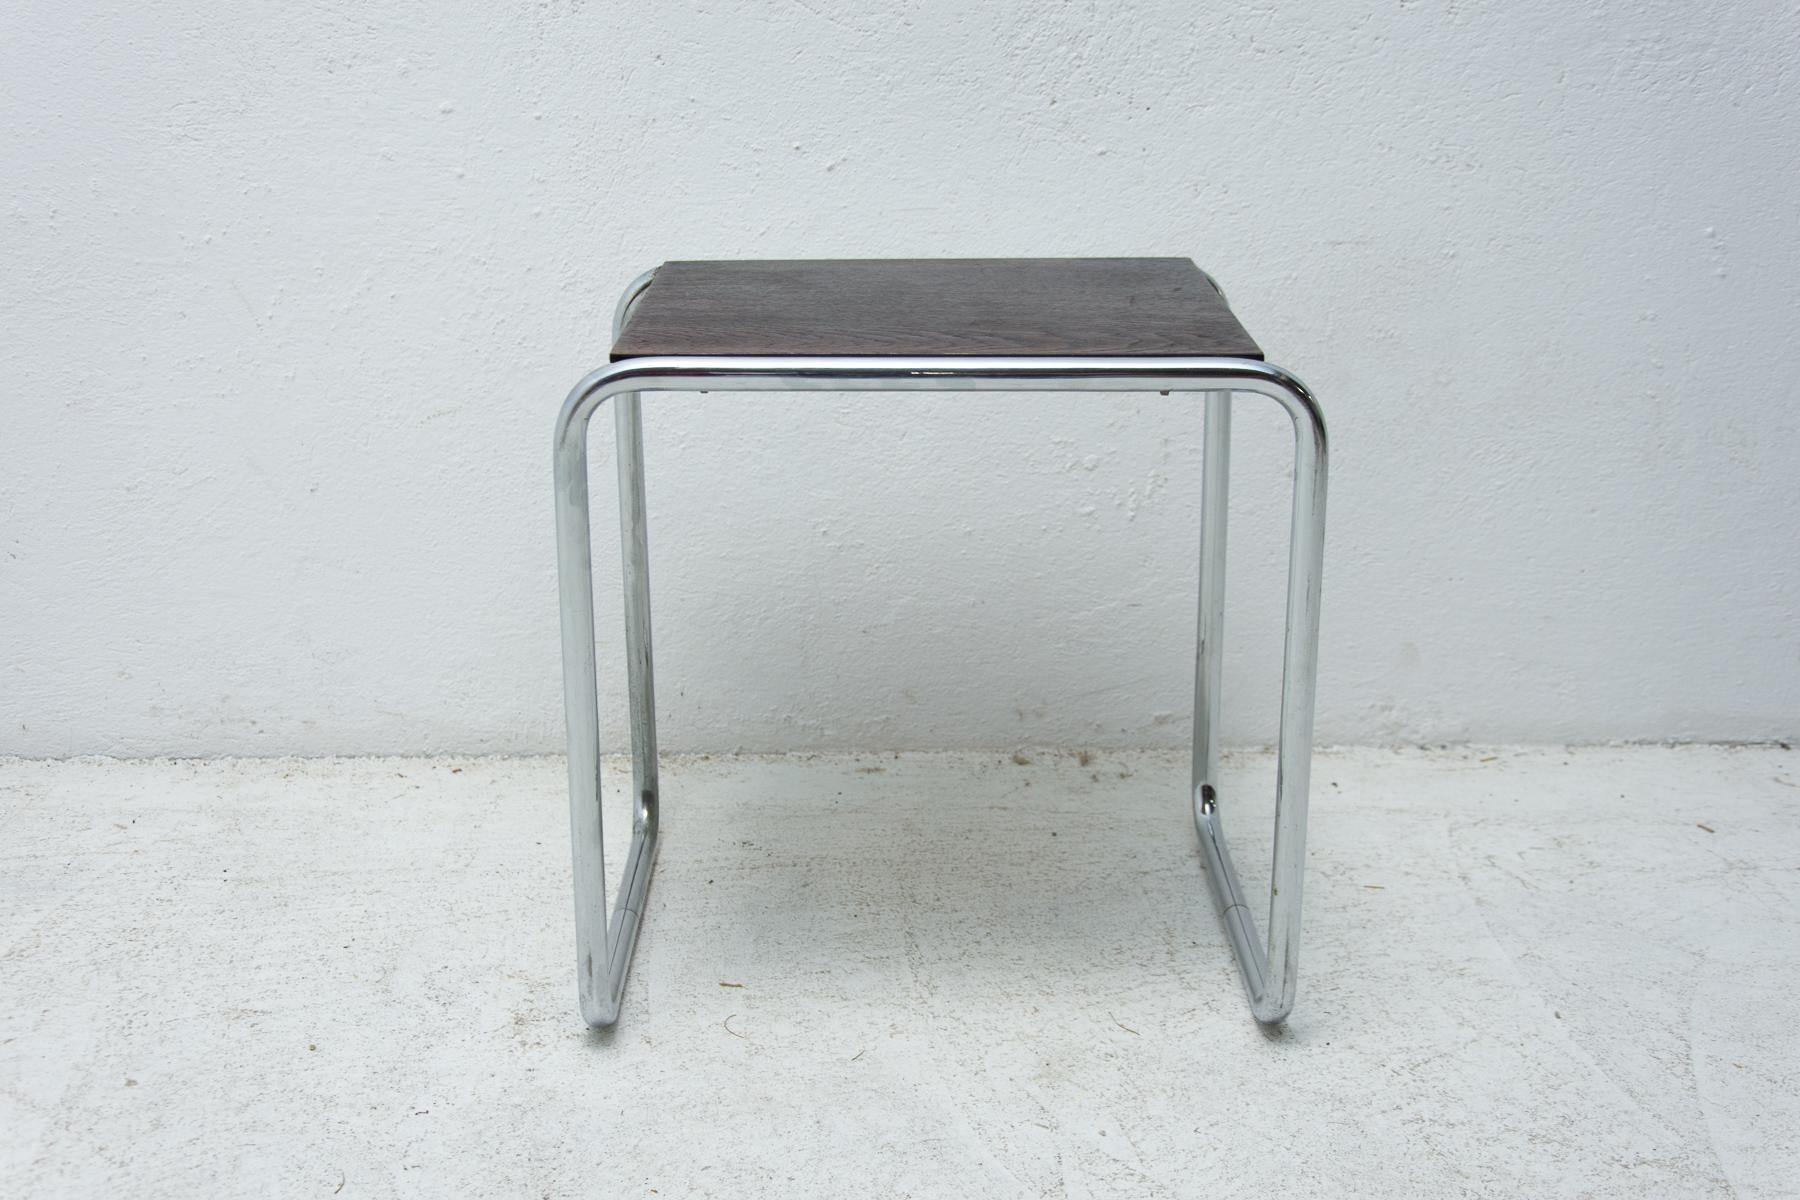 The smallest of the range of B9 nesting tables that were designed in 1928 by Marcel Breuer.
These tables is one of the most popular furniture designs to have emerged at the Bauhaus. This piece is in very good original condition, consistent with his